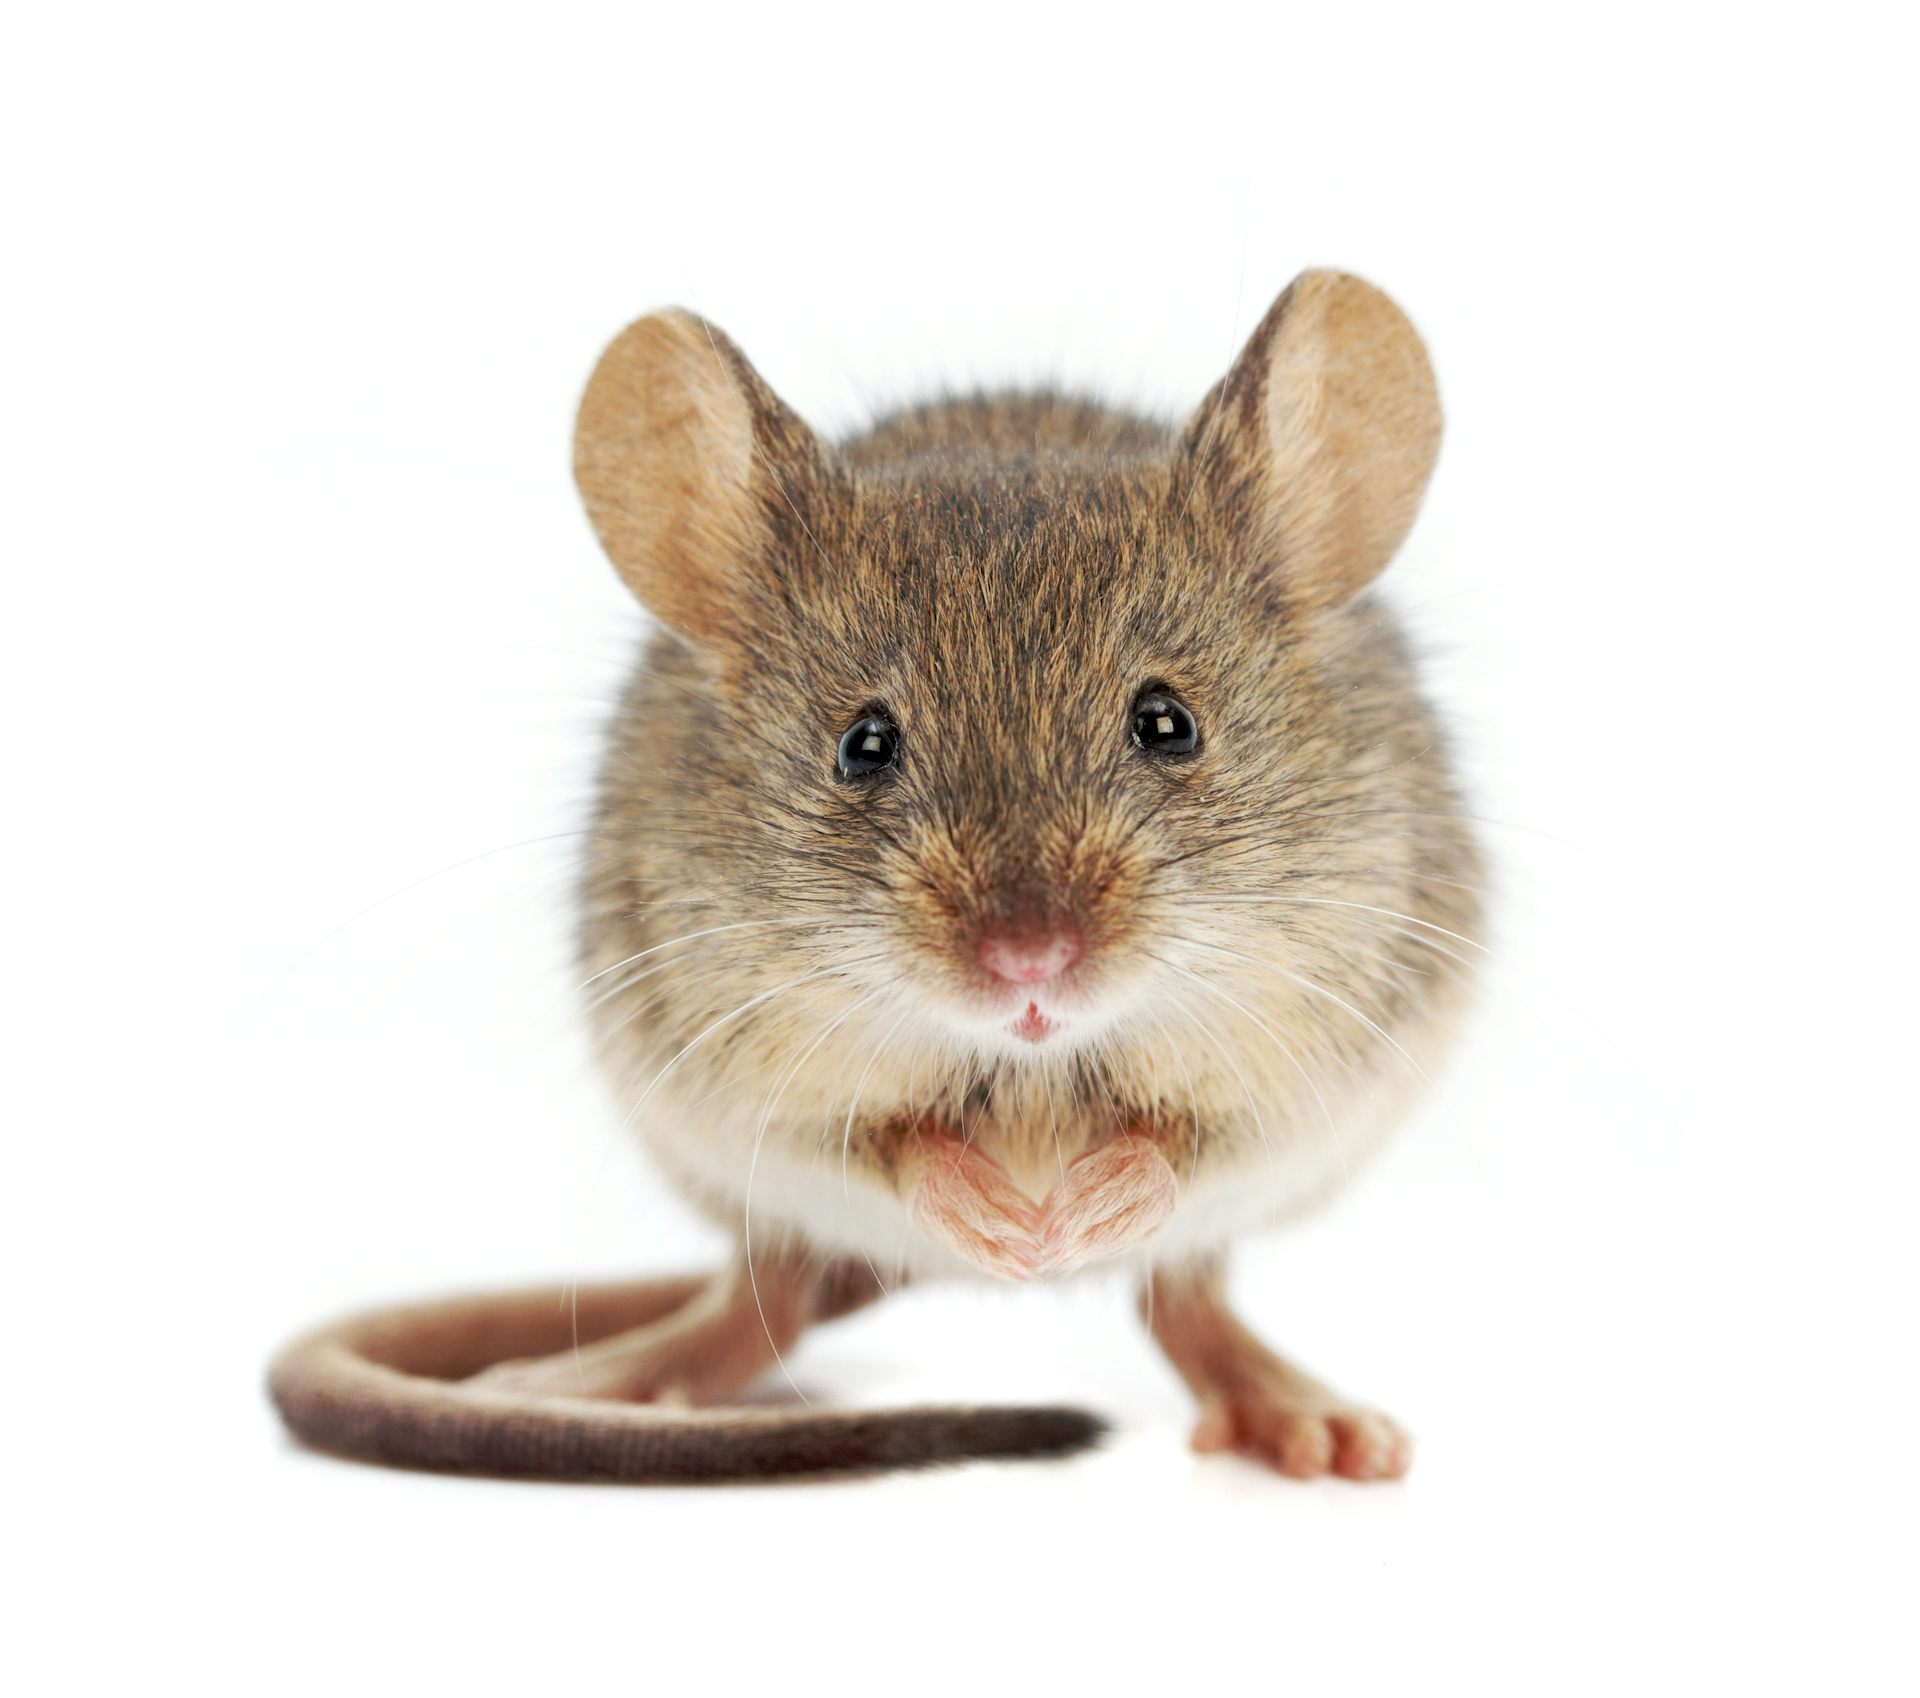 a picture of a mouse